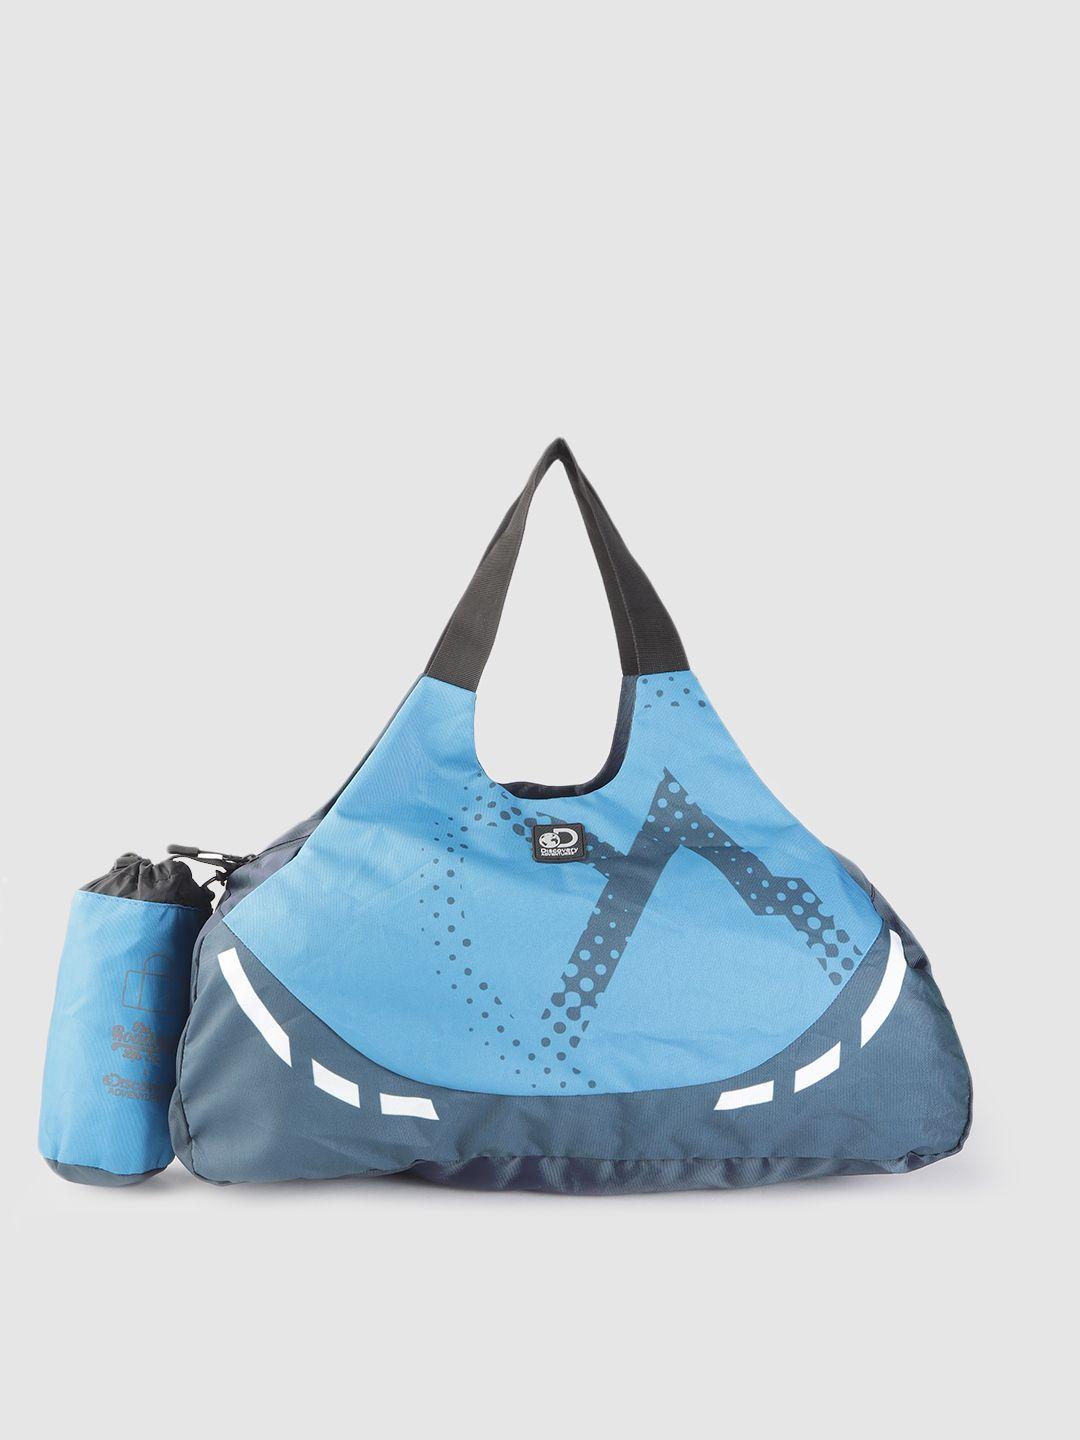 the roadster lifestyle co x discovery adventures unisex blue printed foldable duffle bag - 33 l